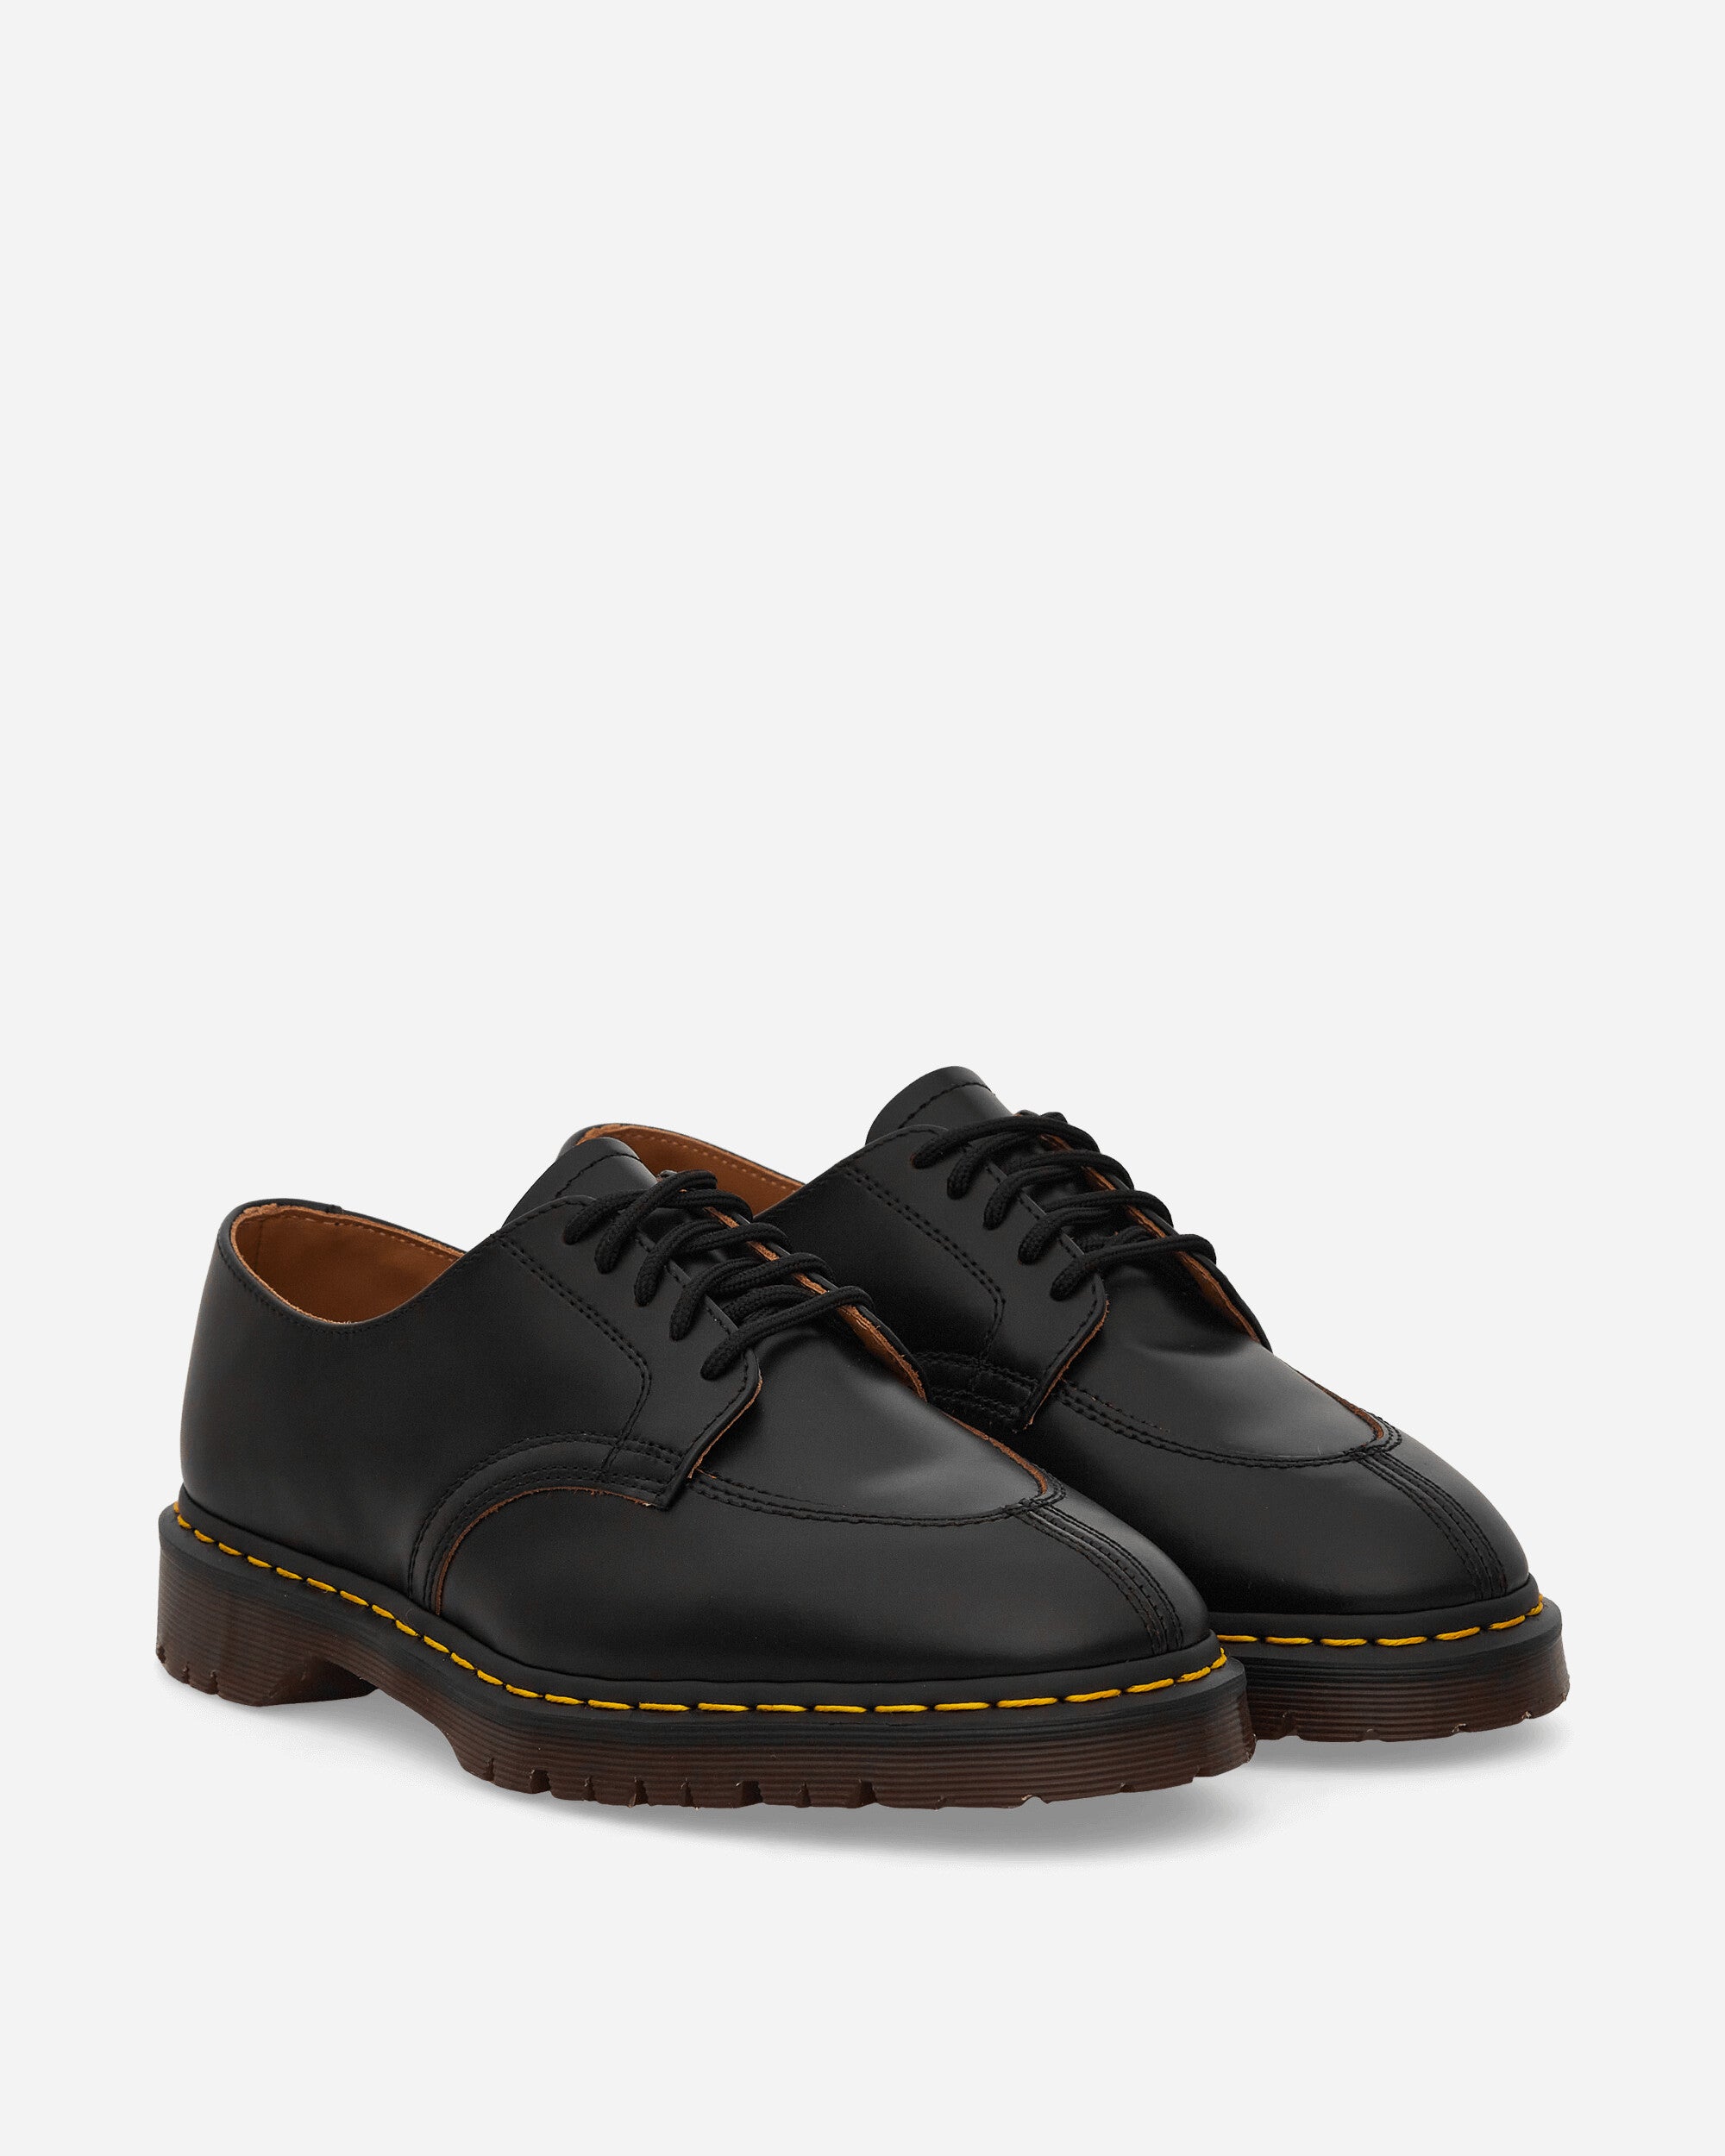 2046 Vintage Smooth Leather Oxford Shoes Black